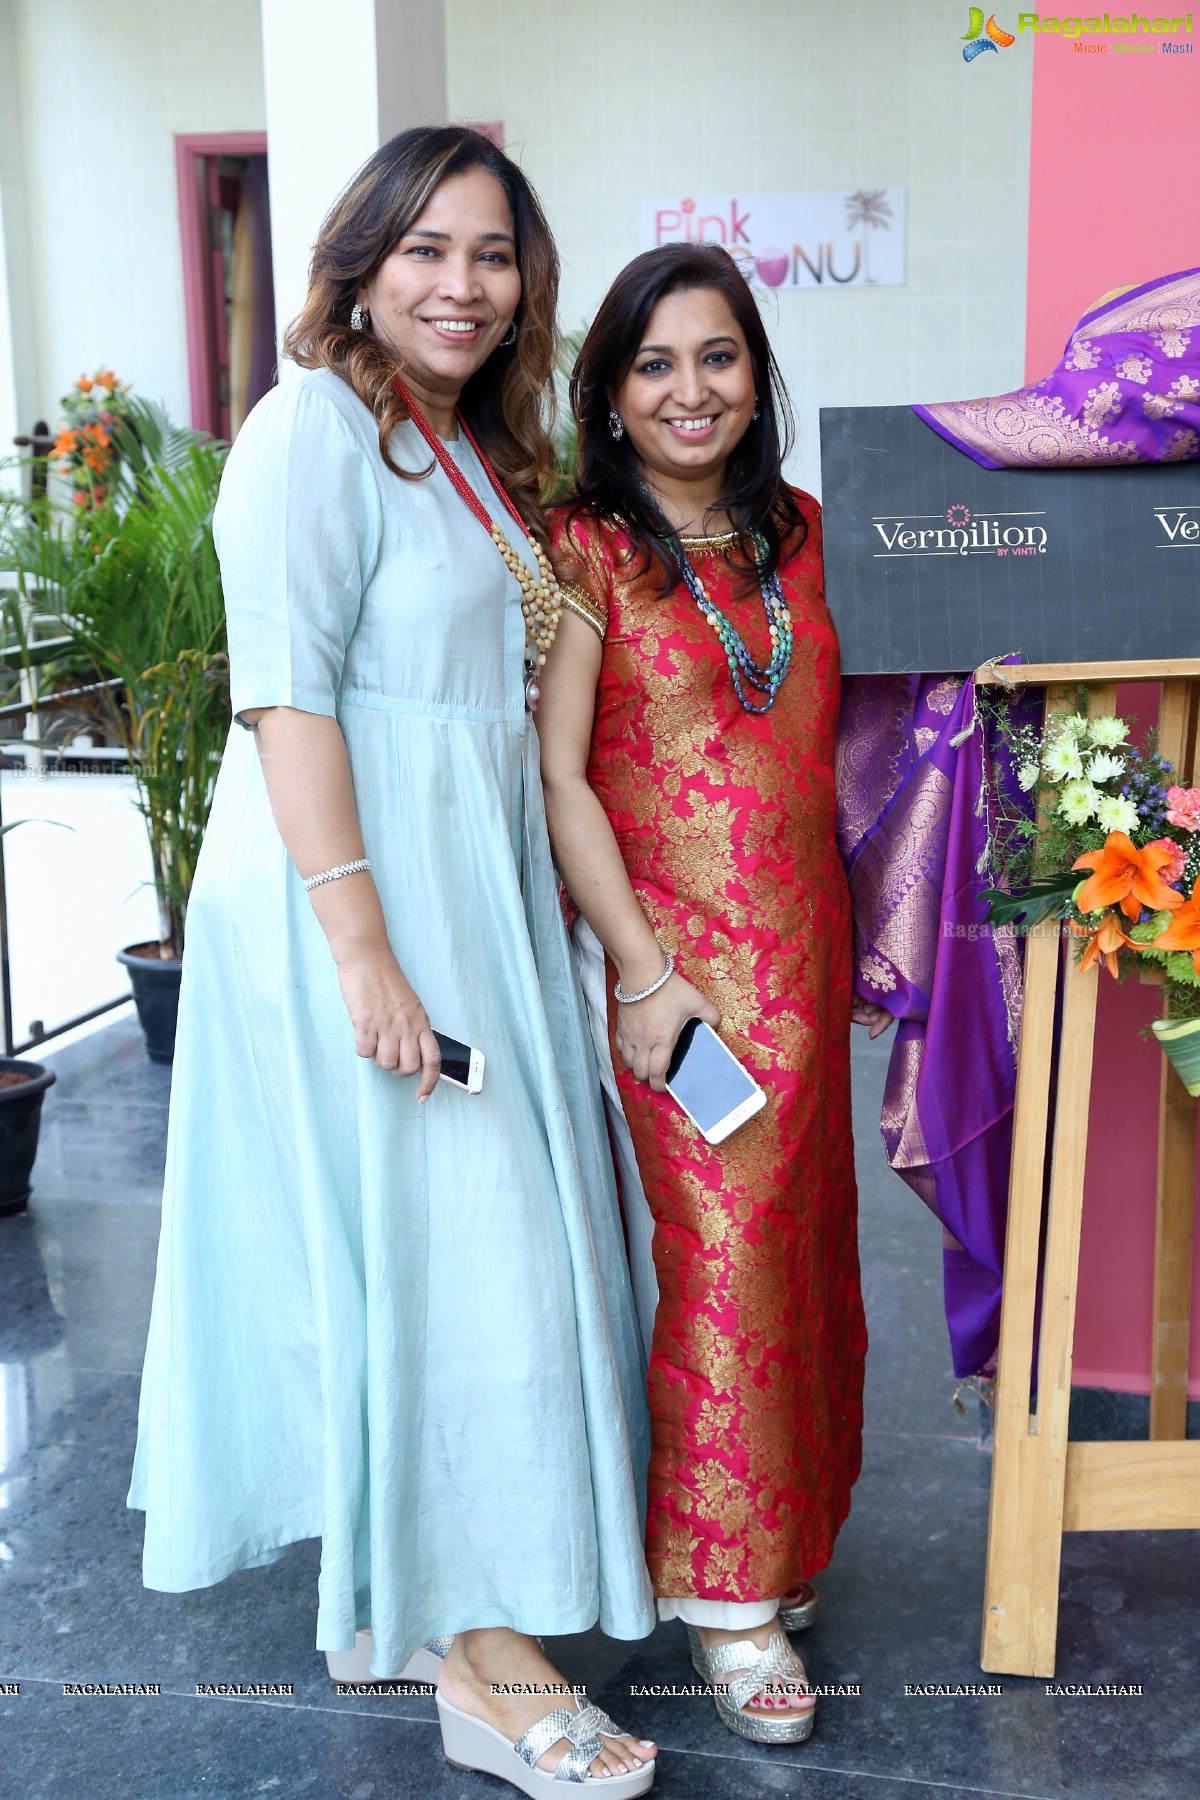 Vermilion by Vinti at Pink Coconut, Jubilee Hills